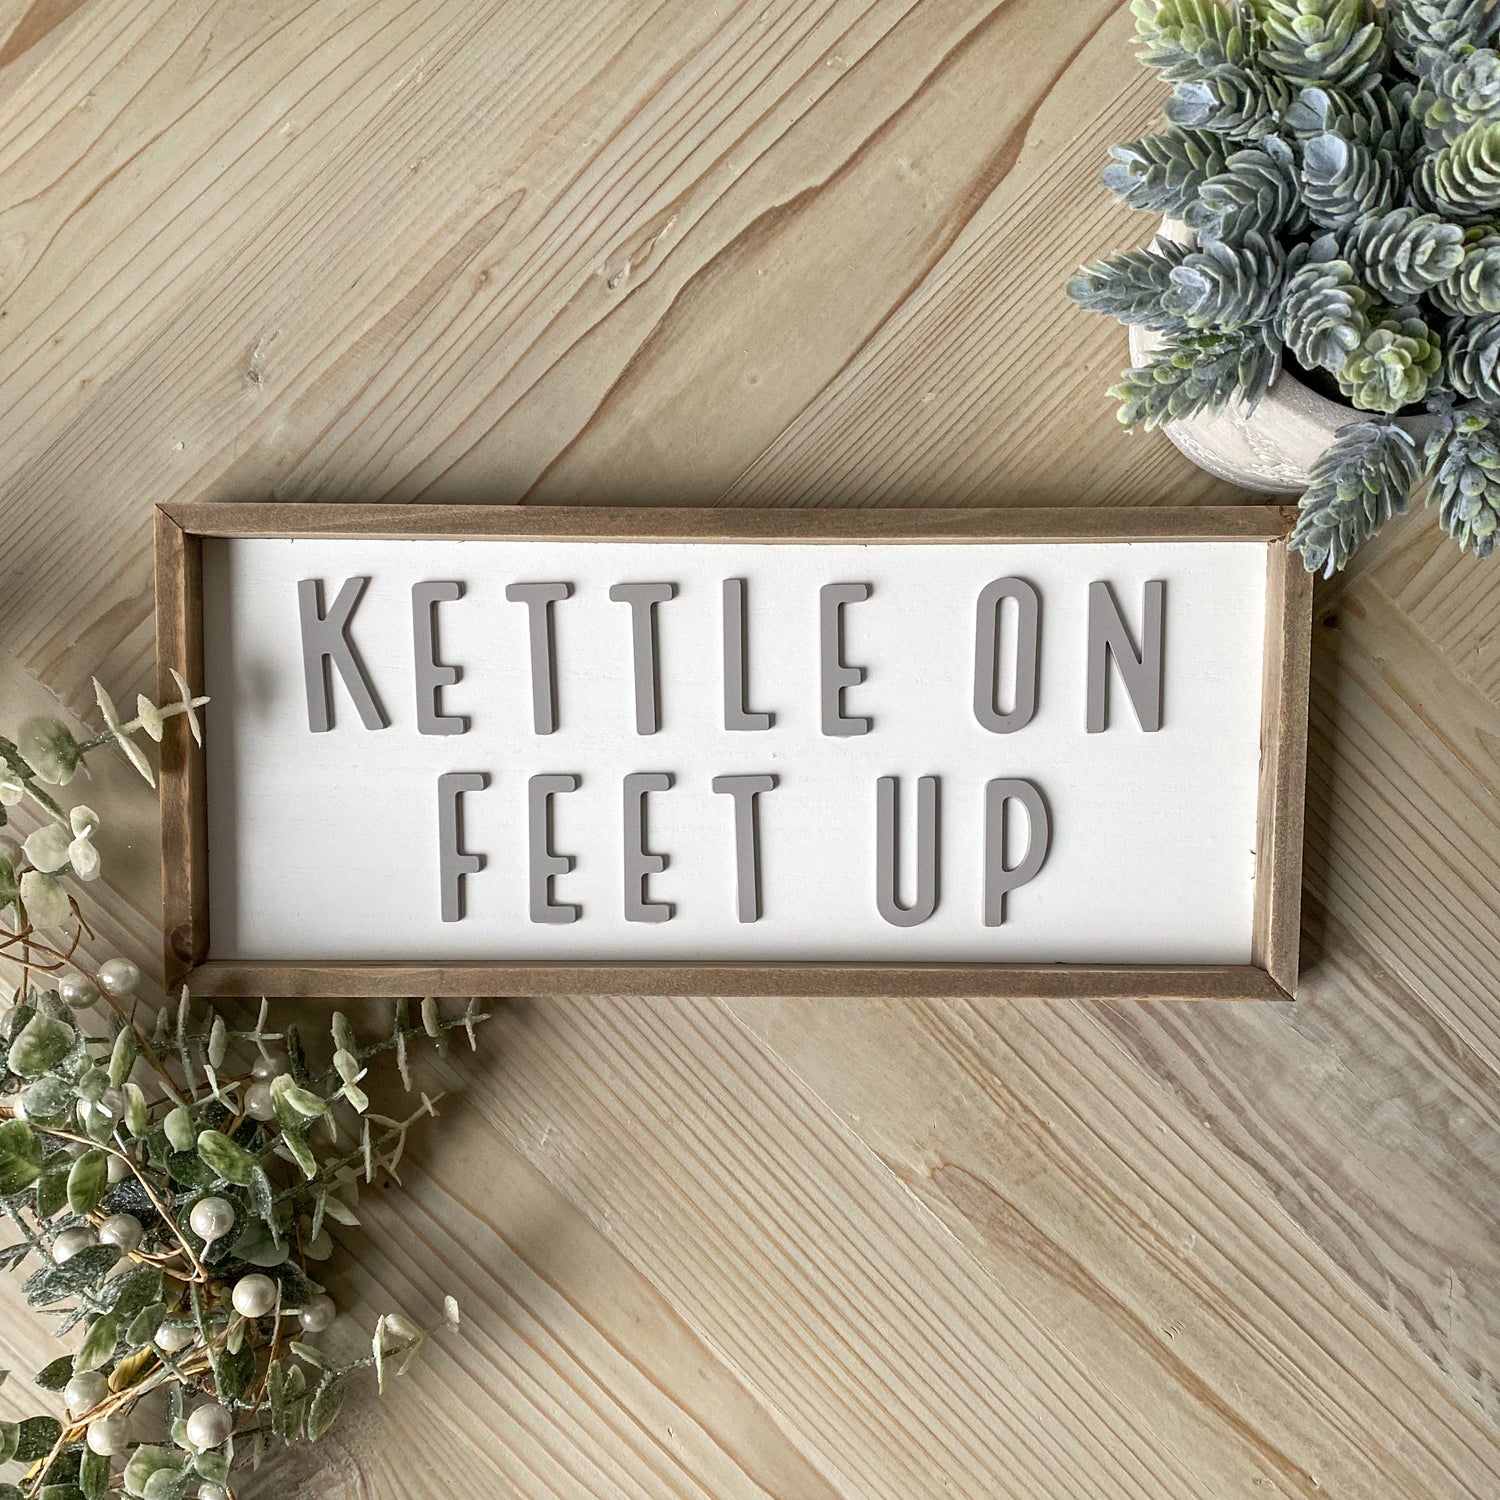 Kettle On Feet Up Sign